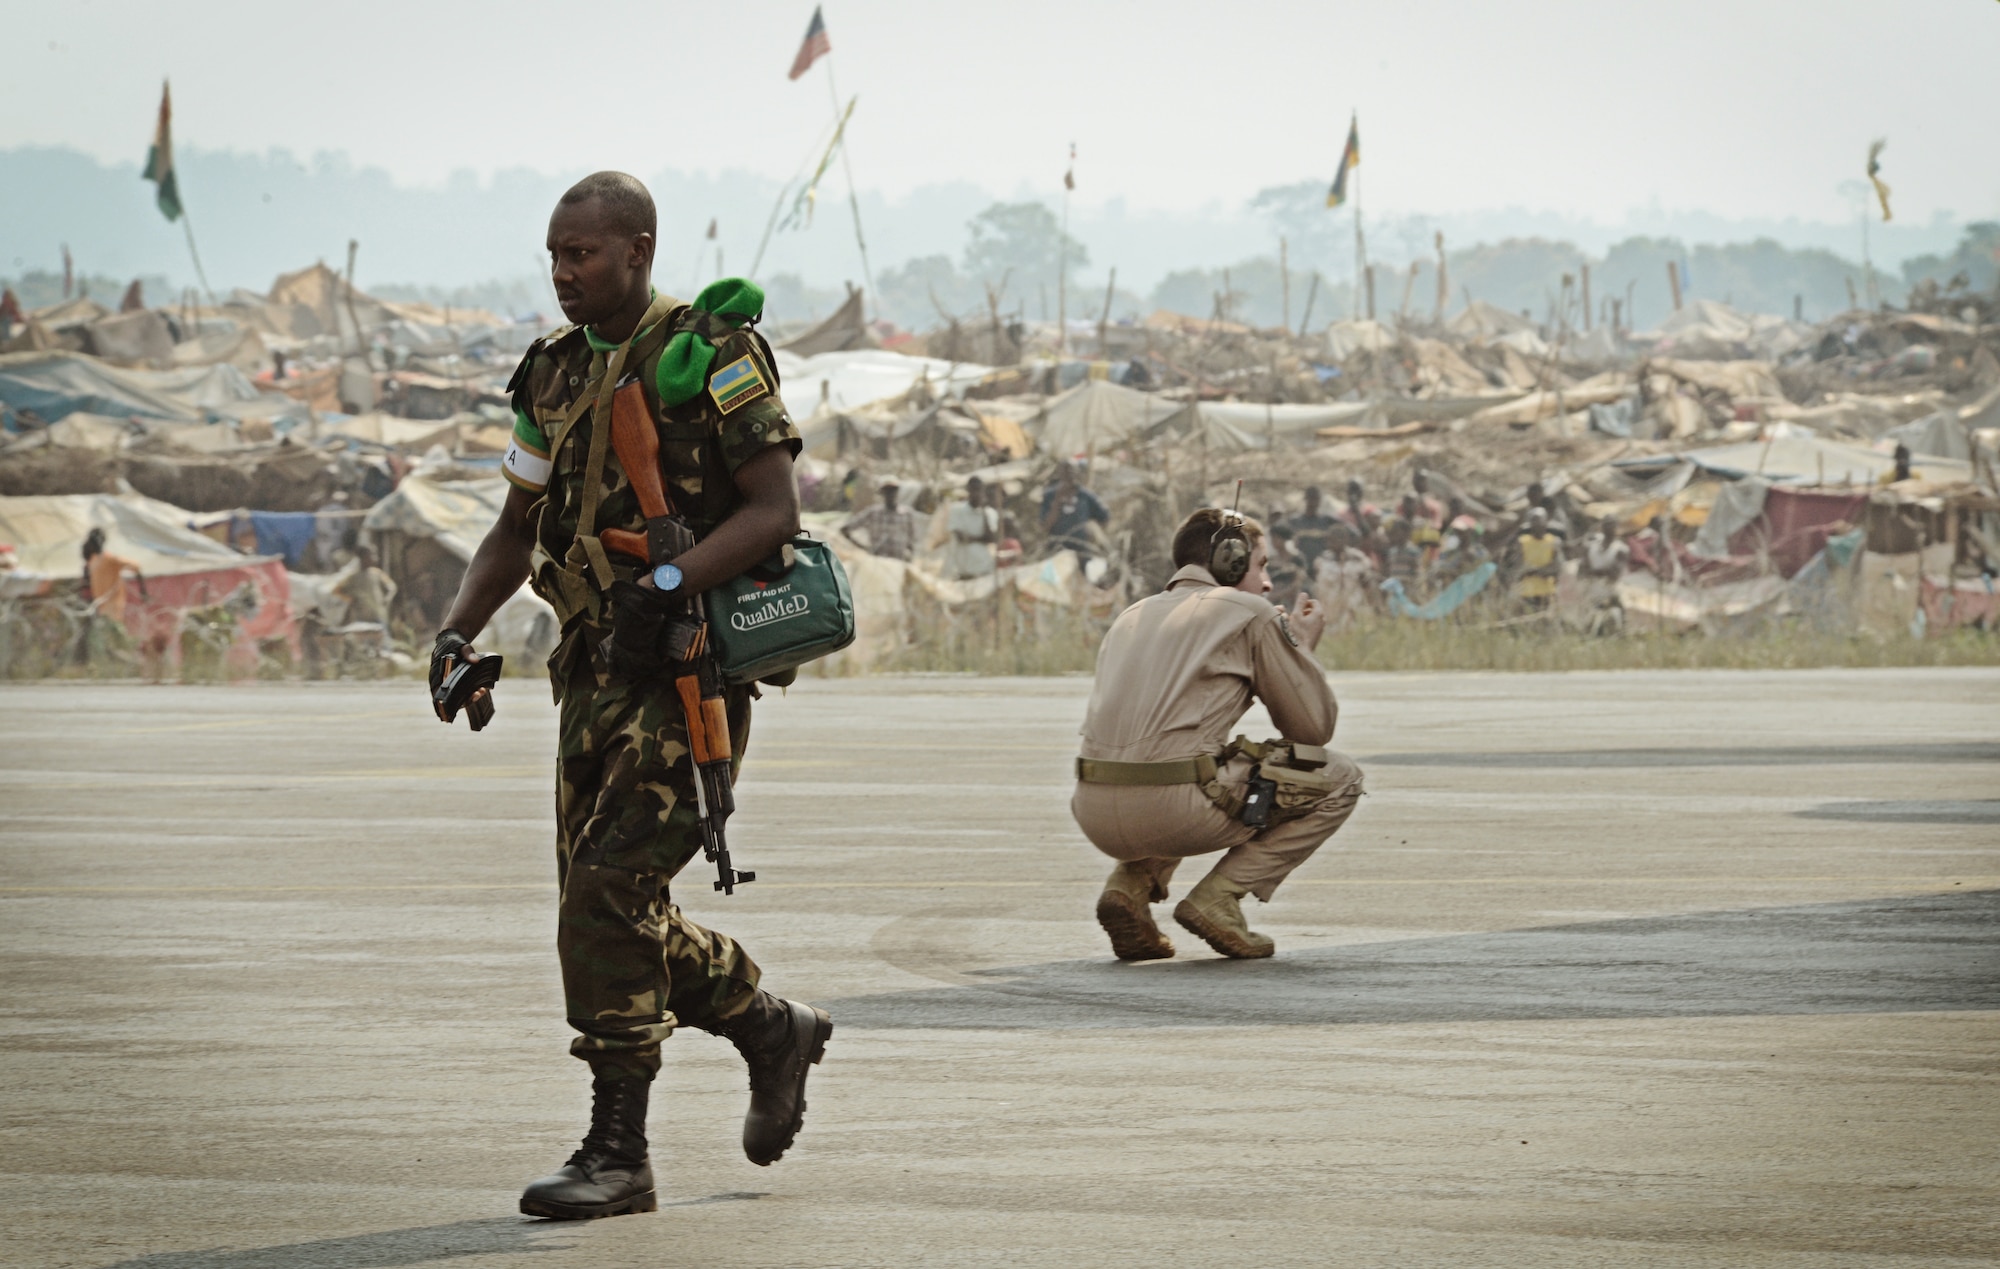 Rwandan soldiers exit a C-17 Globemaster III based out of McChord Air Force Base, Wash. in the Central African Republic with a refugee camp 100 yards away full of displaced locals due to fighting Jan. 19, 2014. U.S. forces will transport a total number of 850 Rwandan soldiers and more than 1000 tons of equipment into the Central African Republic to aid French and African Union operations against militants during this three week-long operation. (U.S. Air Force photo/ Staff Sgt. Ryan Crane)